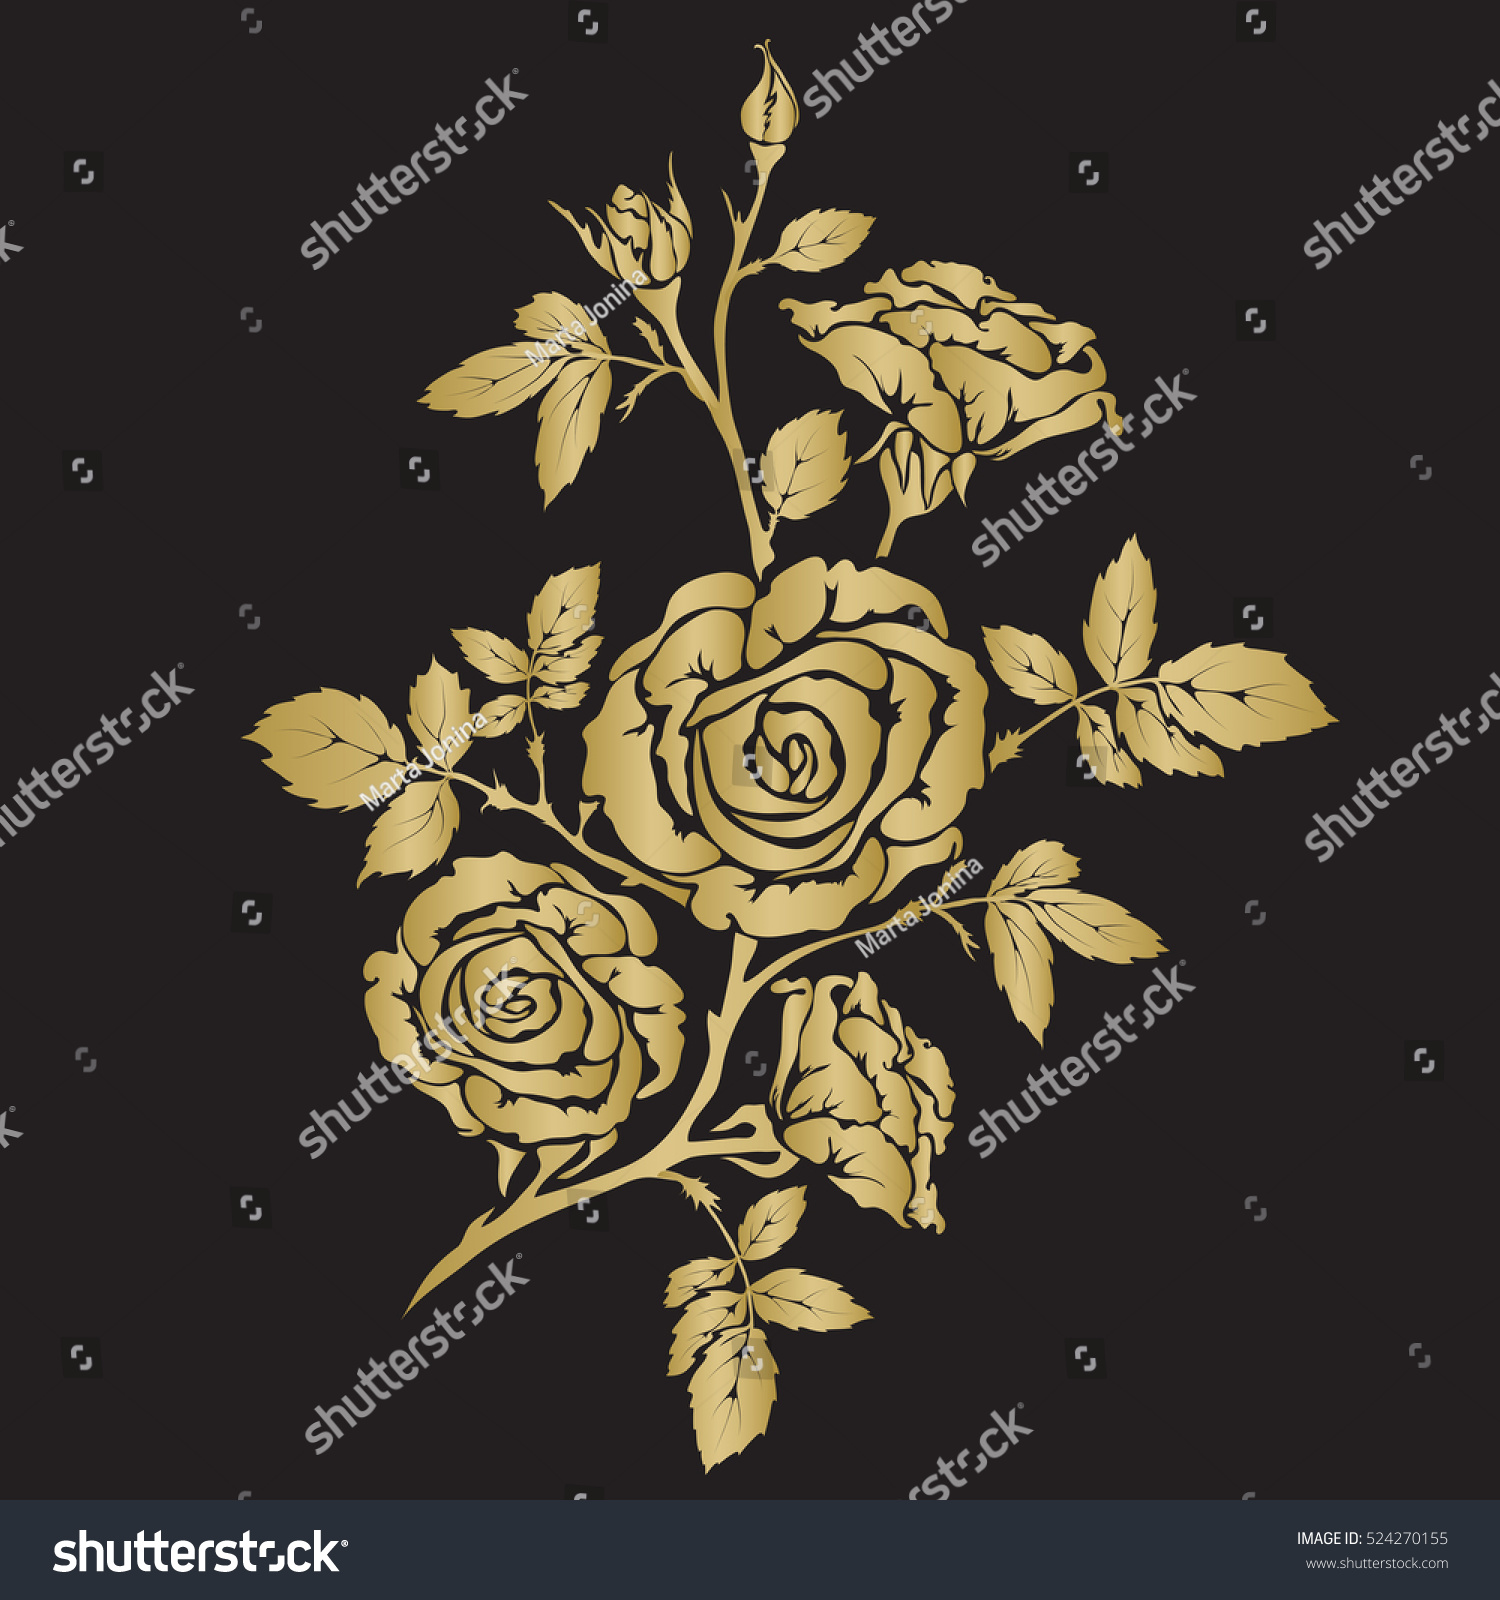 Silhouette Rose Branch Opened Flowers Buds Stock Photo (Photo ...